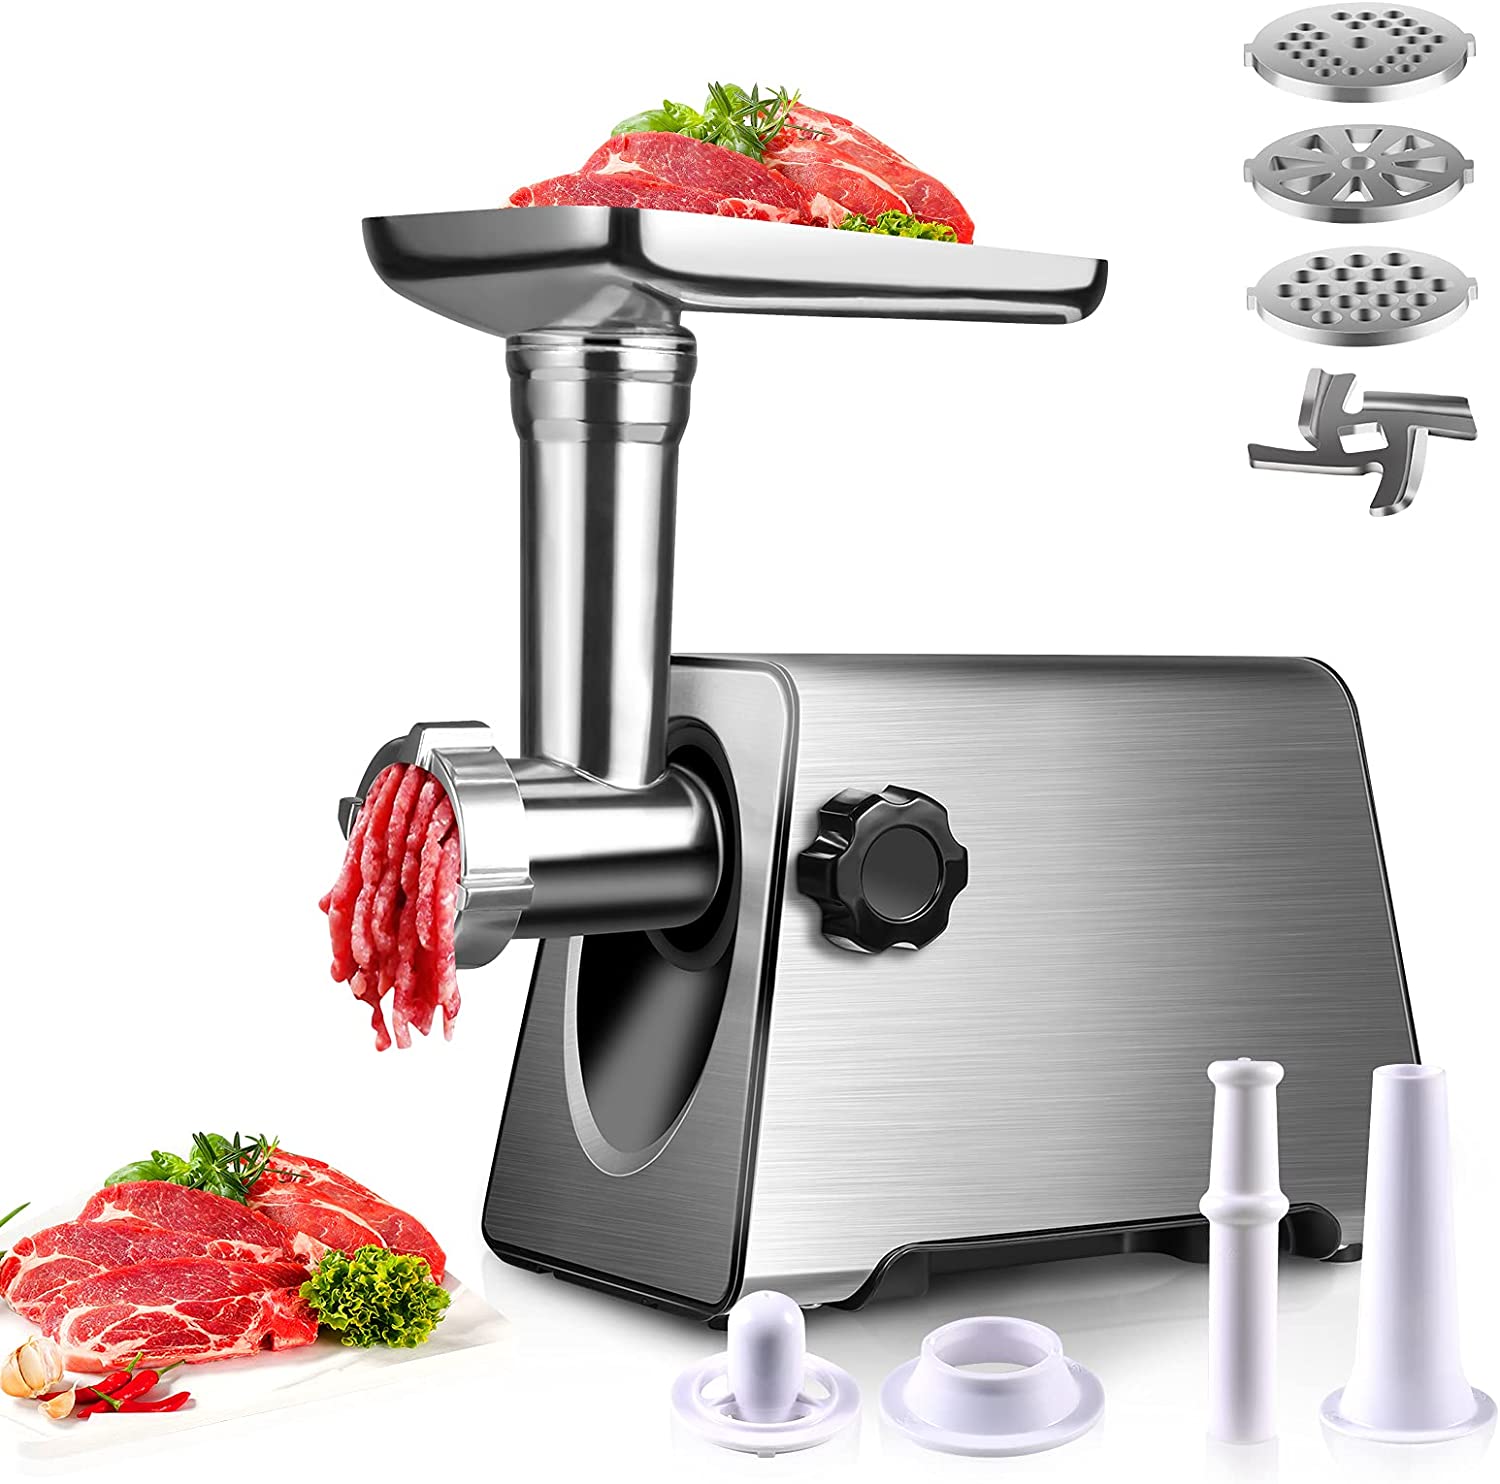 BenRich Meat Grinder Electric Sausage Burger Maker Stuffer Machine with 3 Sizes Metal Plates and Kibbe Attachment, Max 2800 W Stainless Steel Body for Home Use